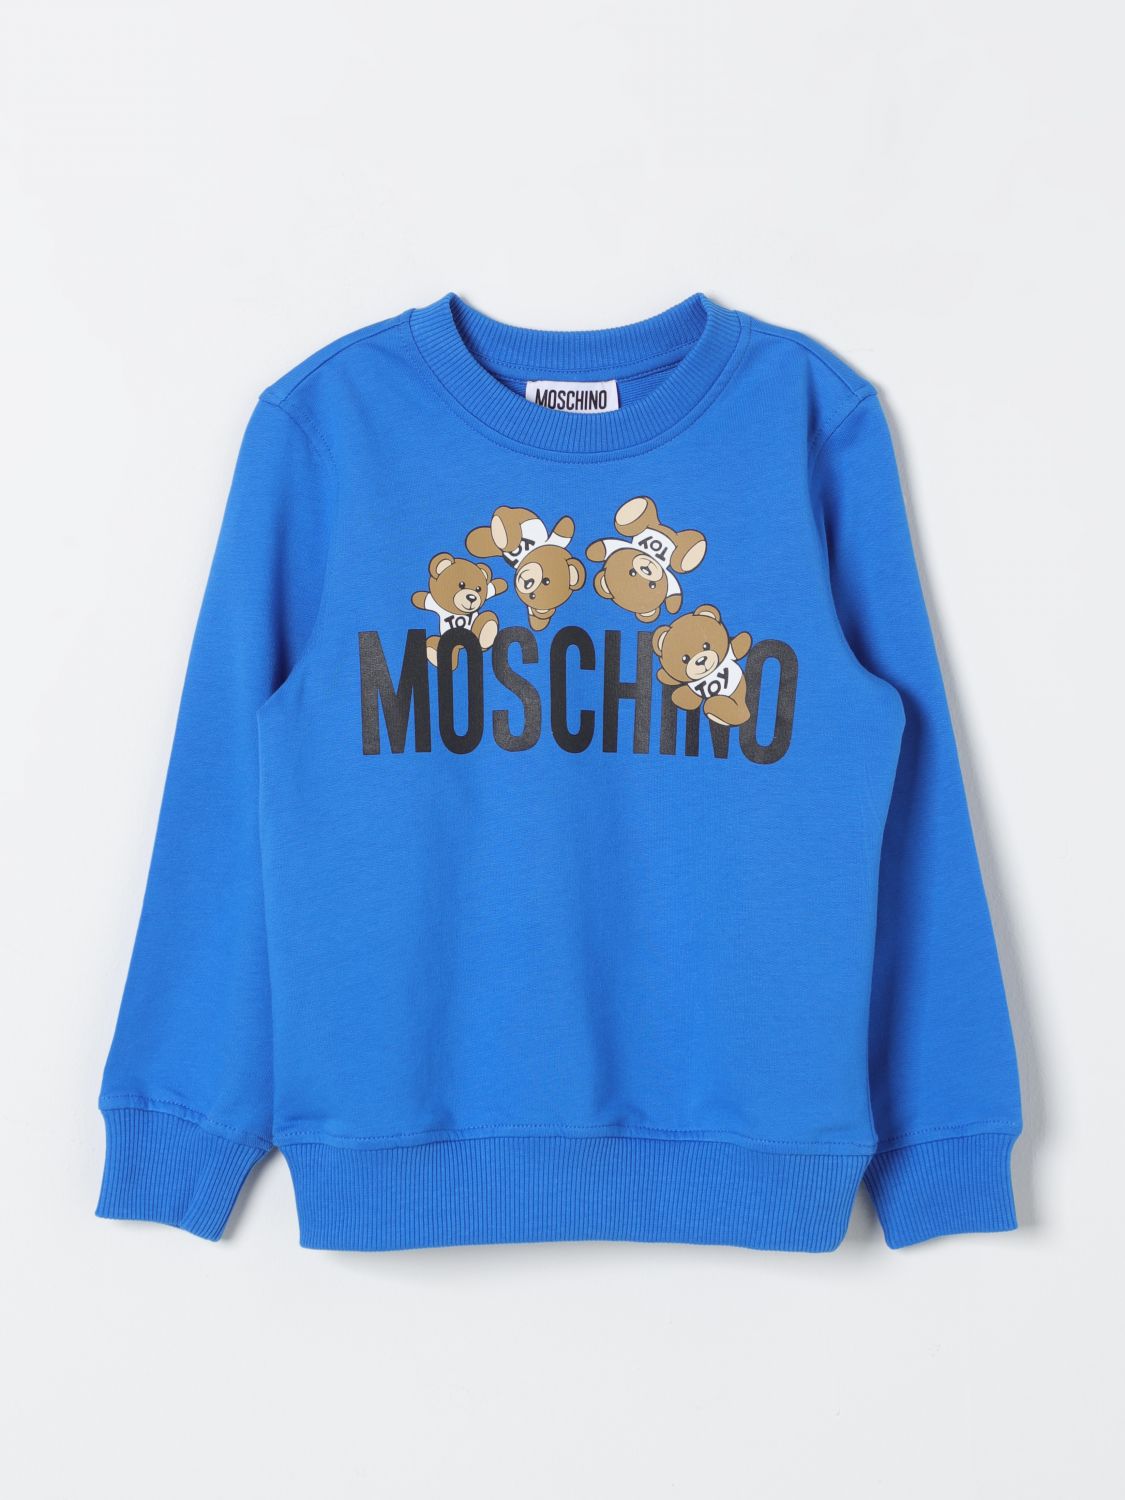 Moschino Kid Sweater  Kids Color Royal Blue